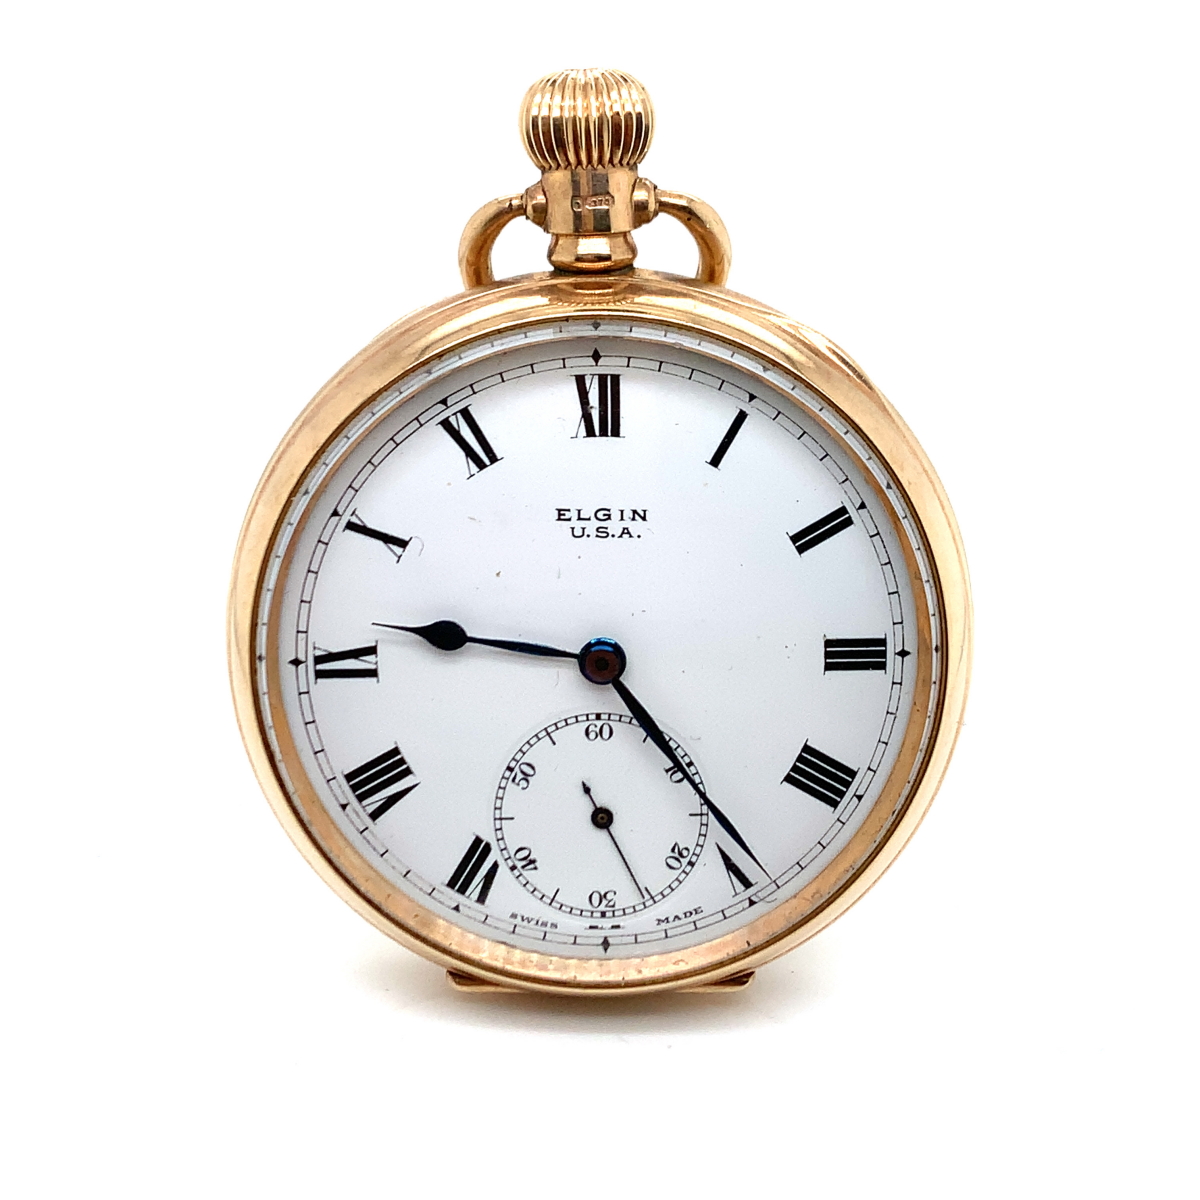 A 9ct HALLMARKED GOLD OPEN FACE ELGIN POCKET WATCH. THE INNER CASE DATED 1922, BIRMINGHAM, A.L.D,